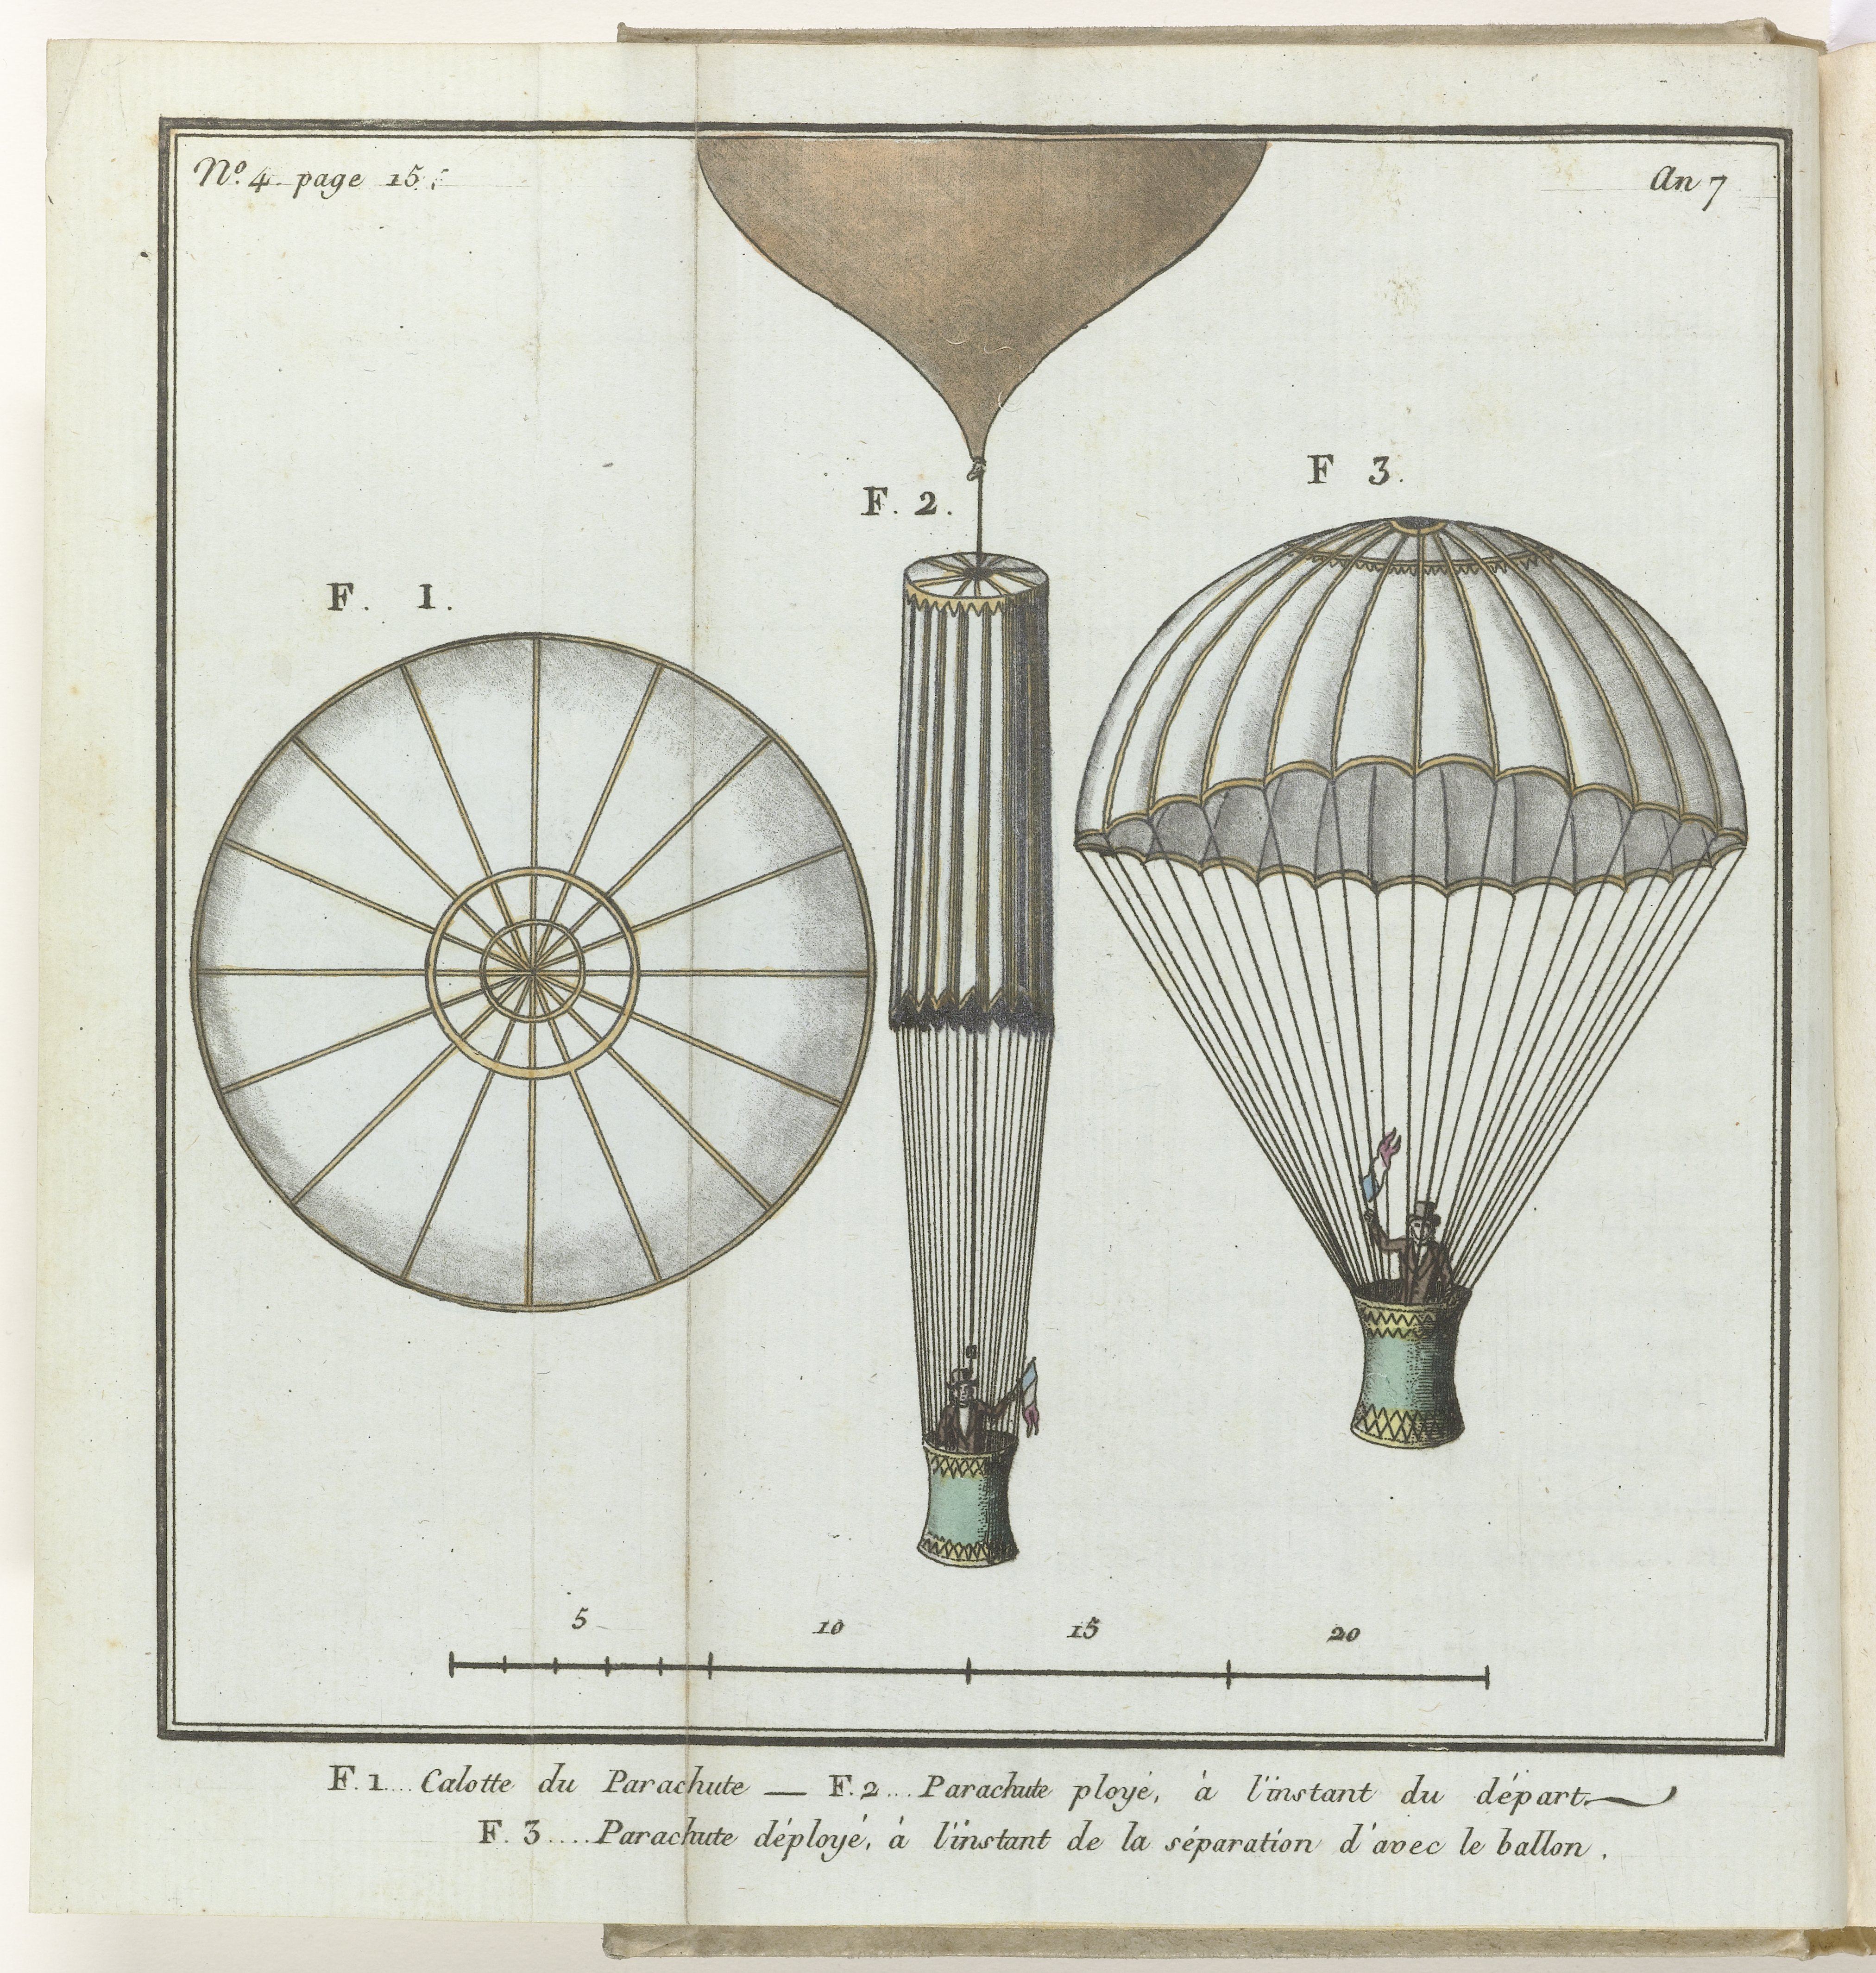 A sketch of a hot air ballone design - first in pieces, then deflated and then inflated with a man waving a French flag.